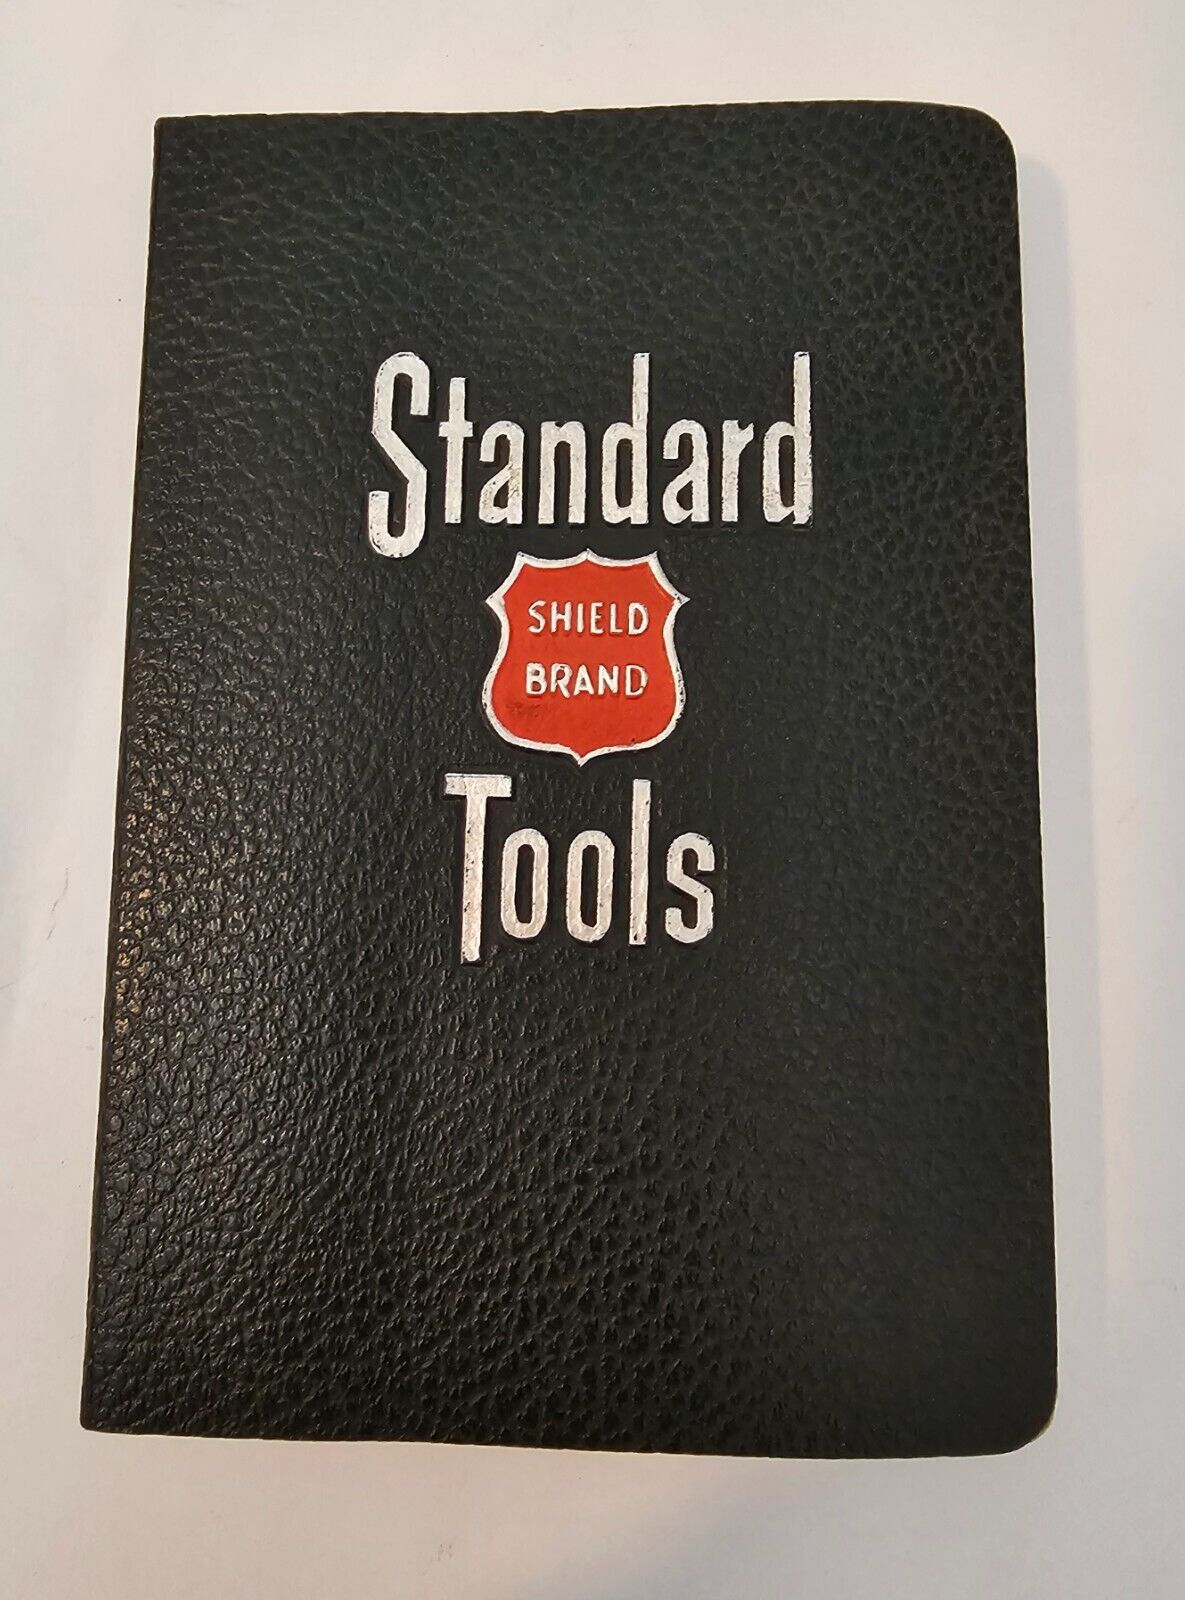 THE STANDARD TOOL COMPANY Vintage 1940s Catalog No. 45a Drills Taps Dies